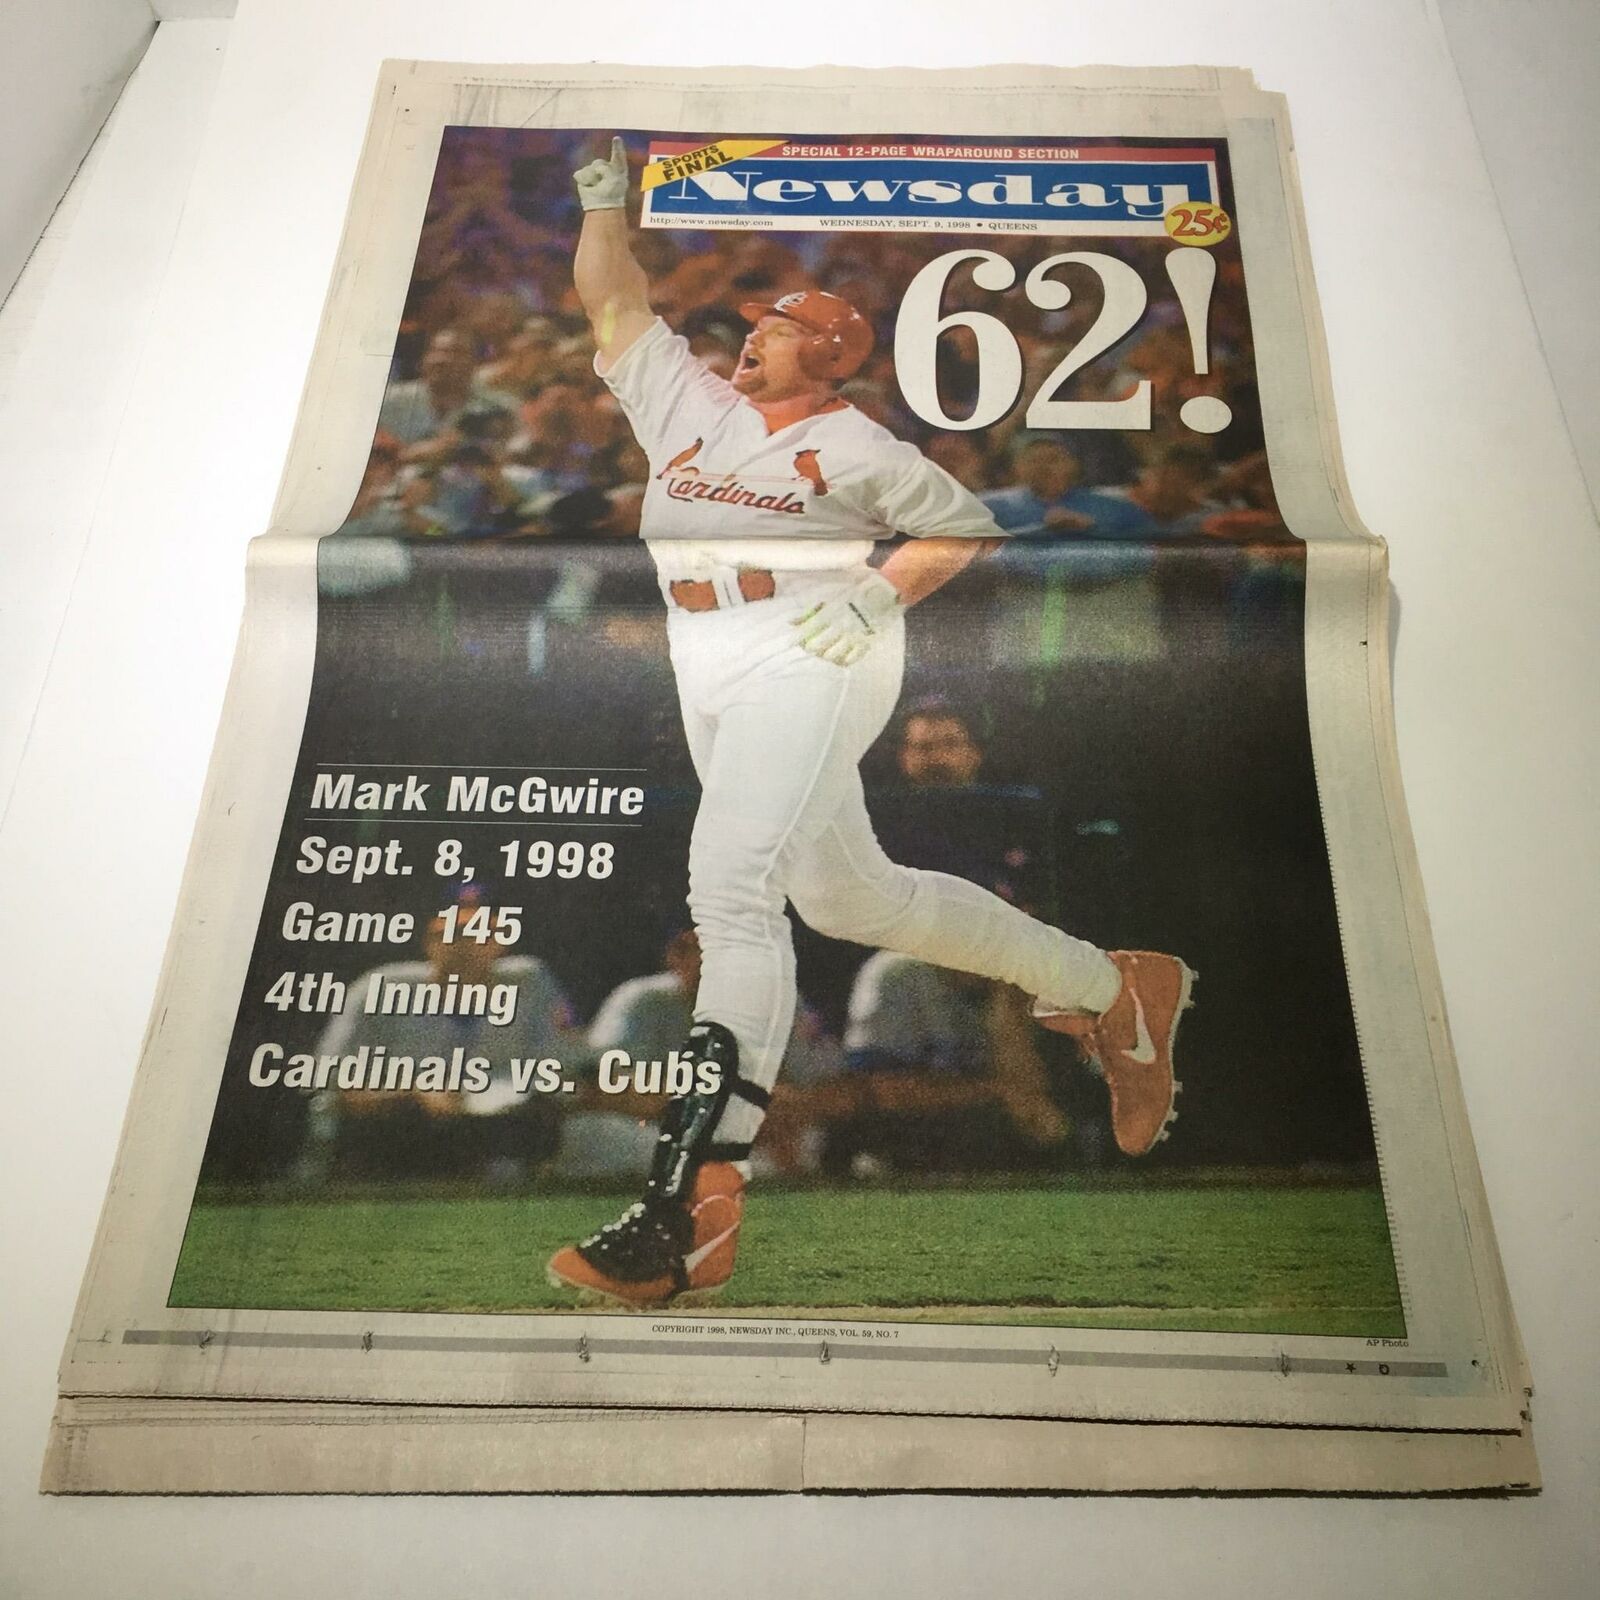 Newsday: Sept 9 1998 62 Mark McGwire st louis cardinals hr chase